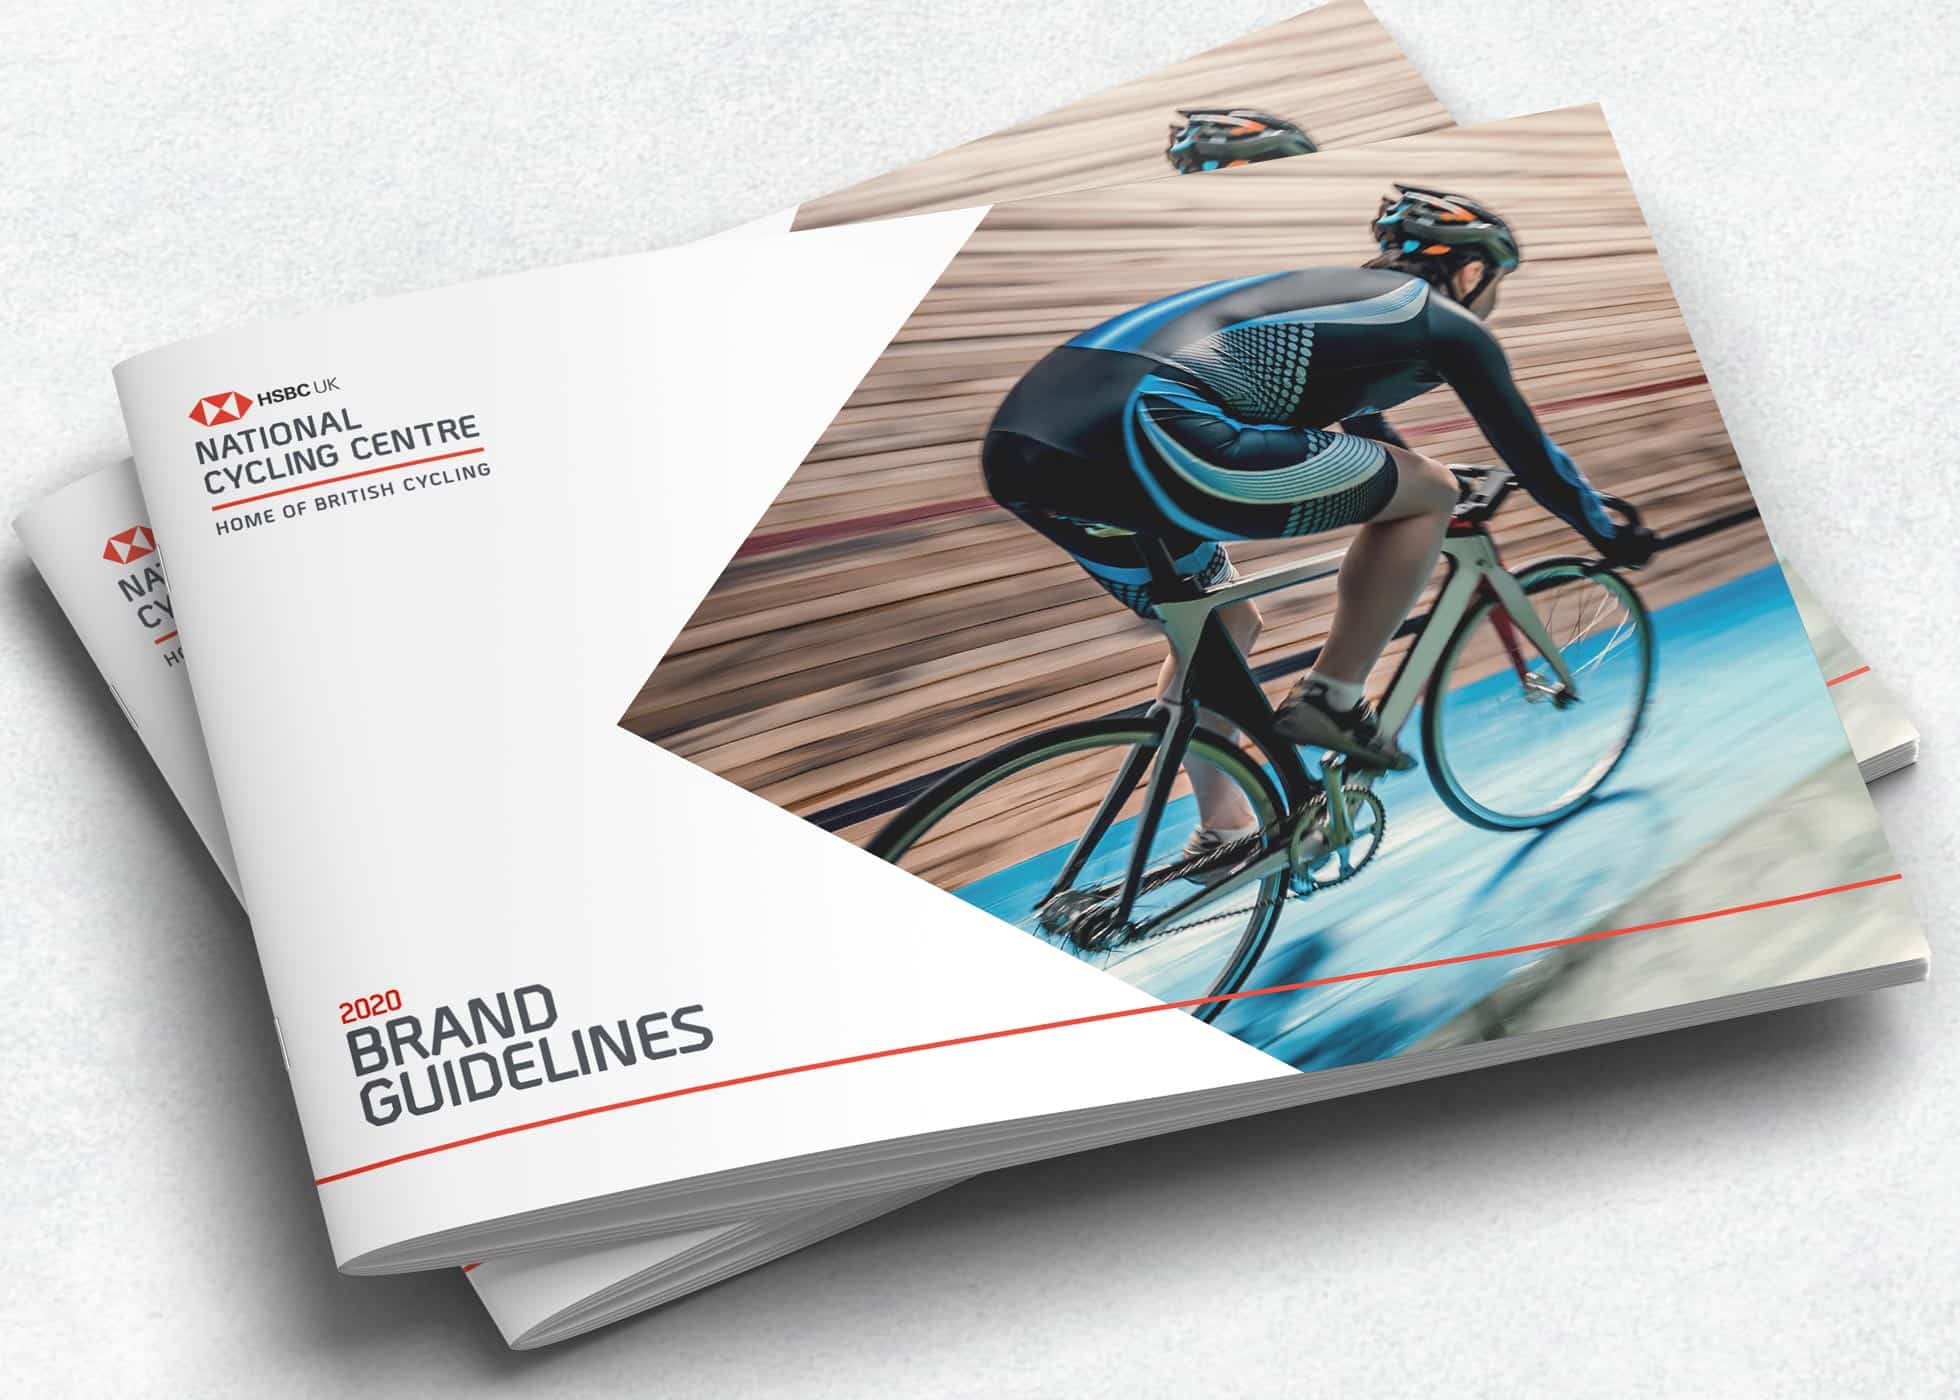 A Brochure HSBC National Cycling Centre Brand Guidelines